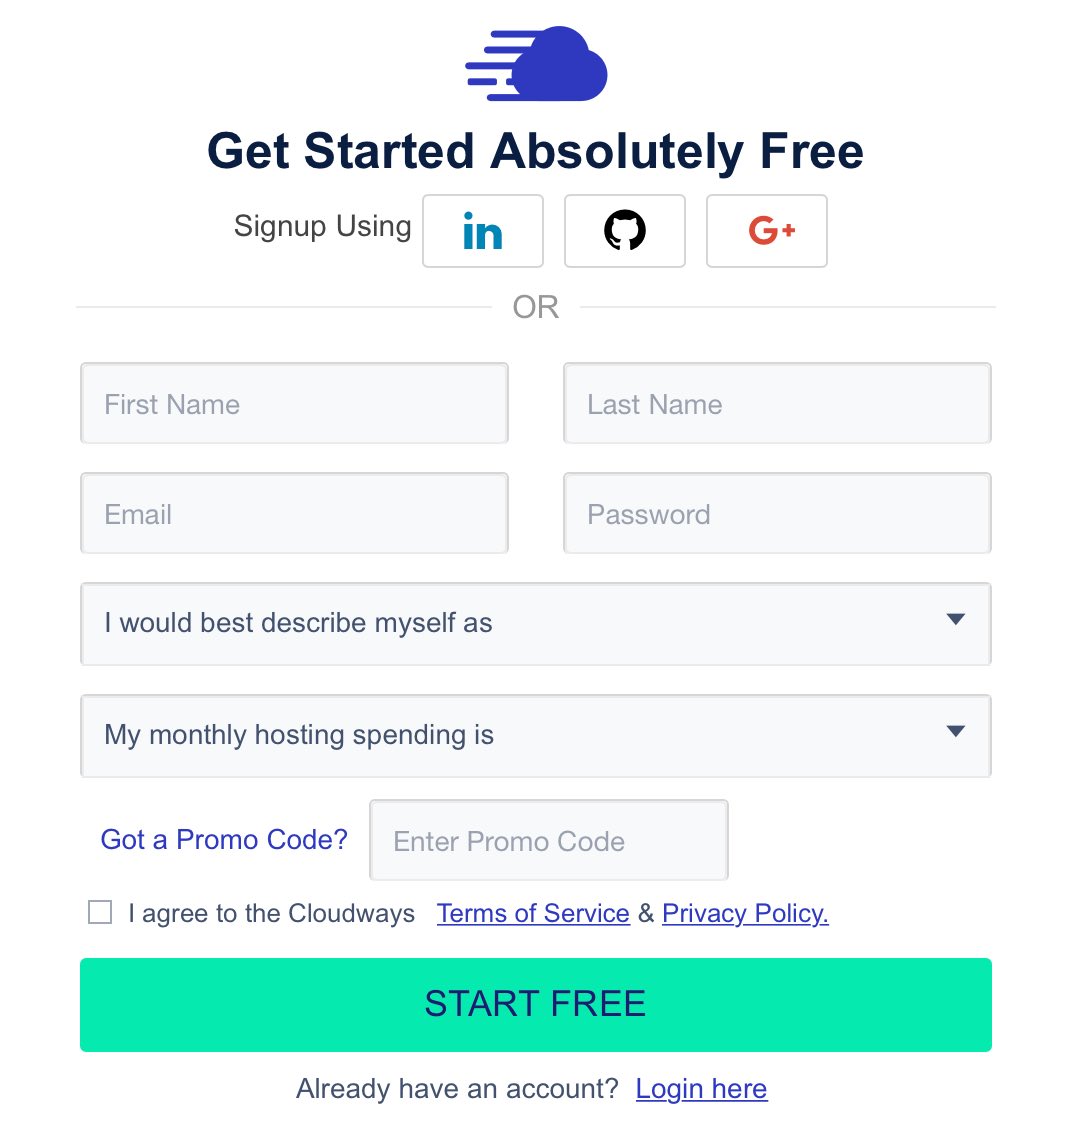 Get Started Absolutely Free